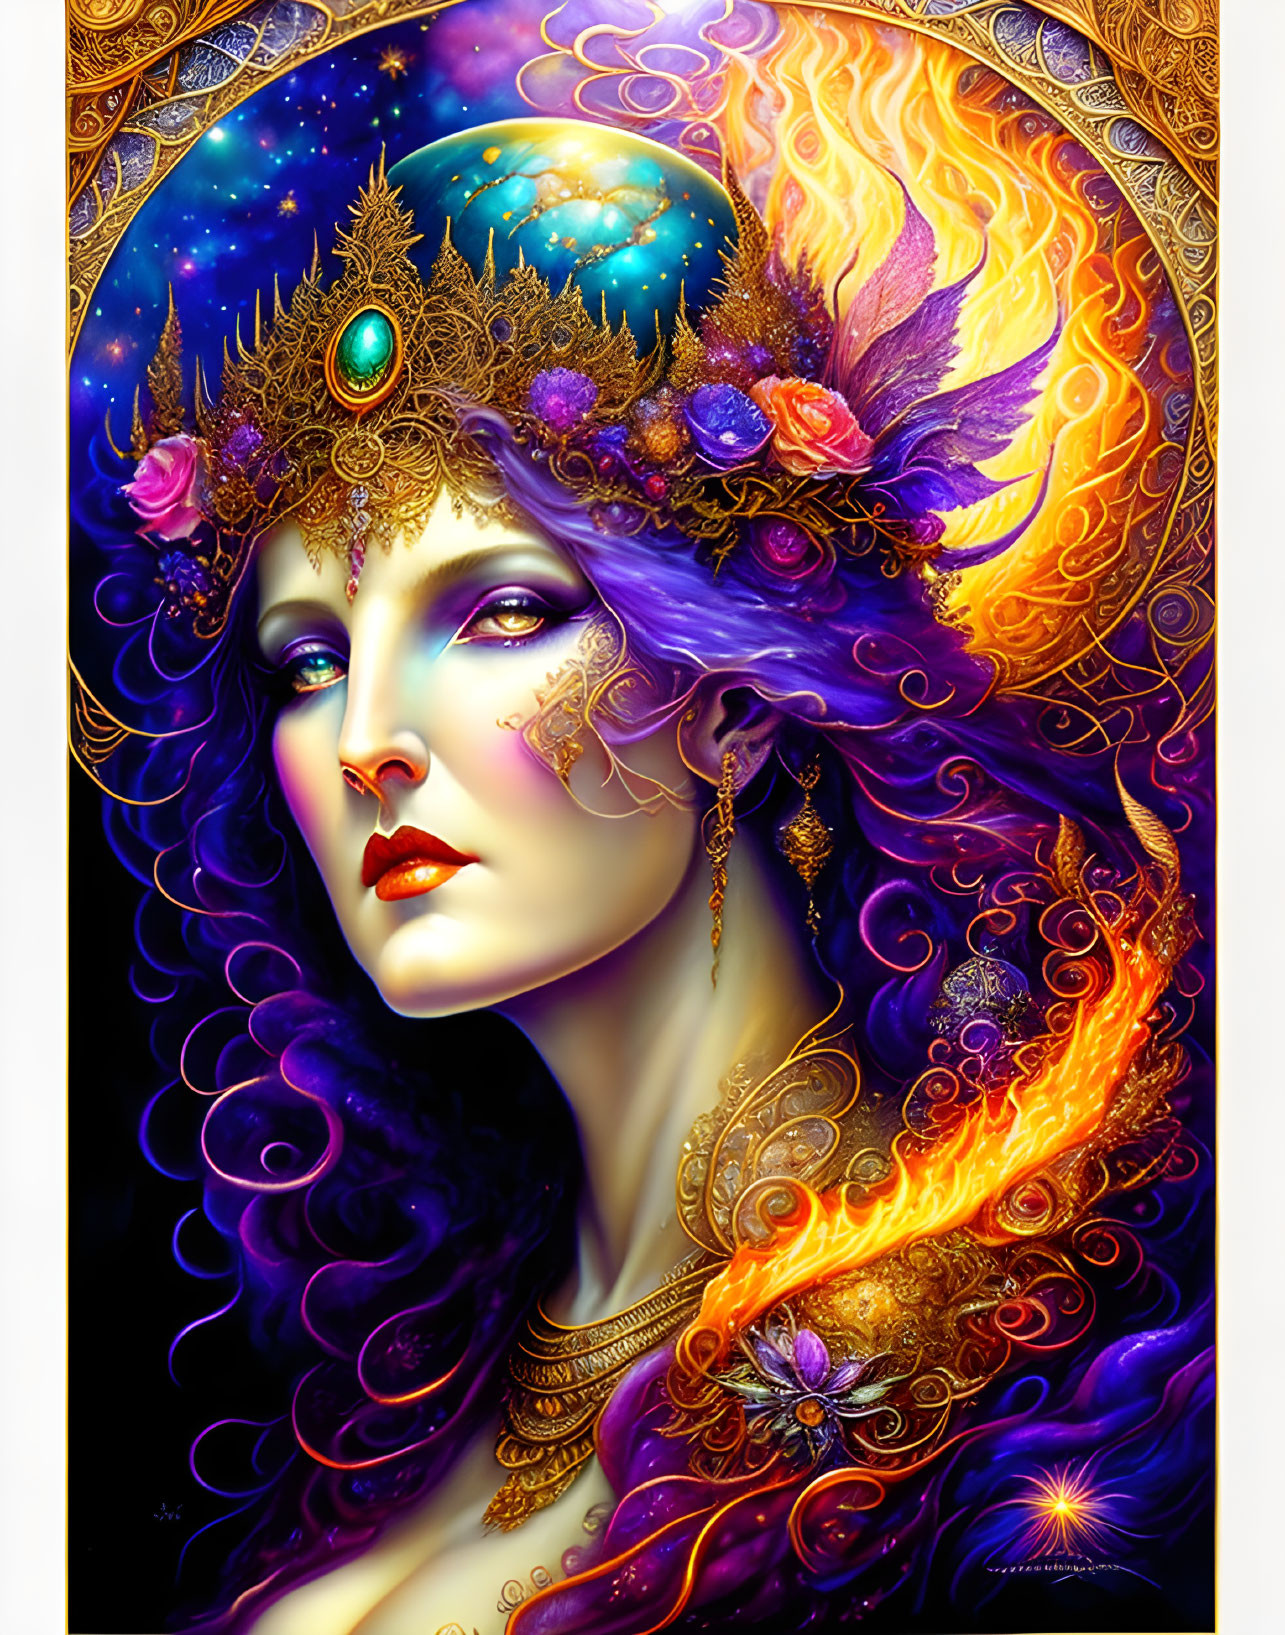 Fantasy female illustration with purple hair, ornate crown, galaxies, golden jewelry, fiery colors